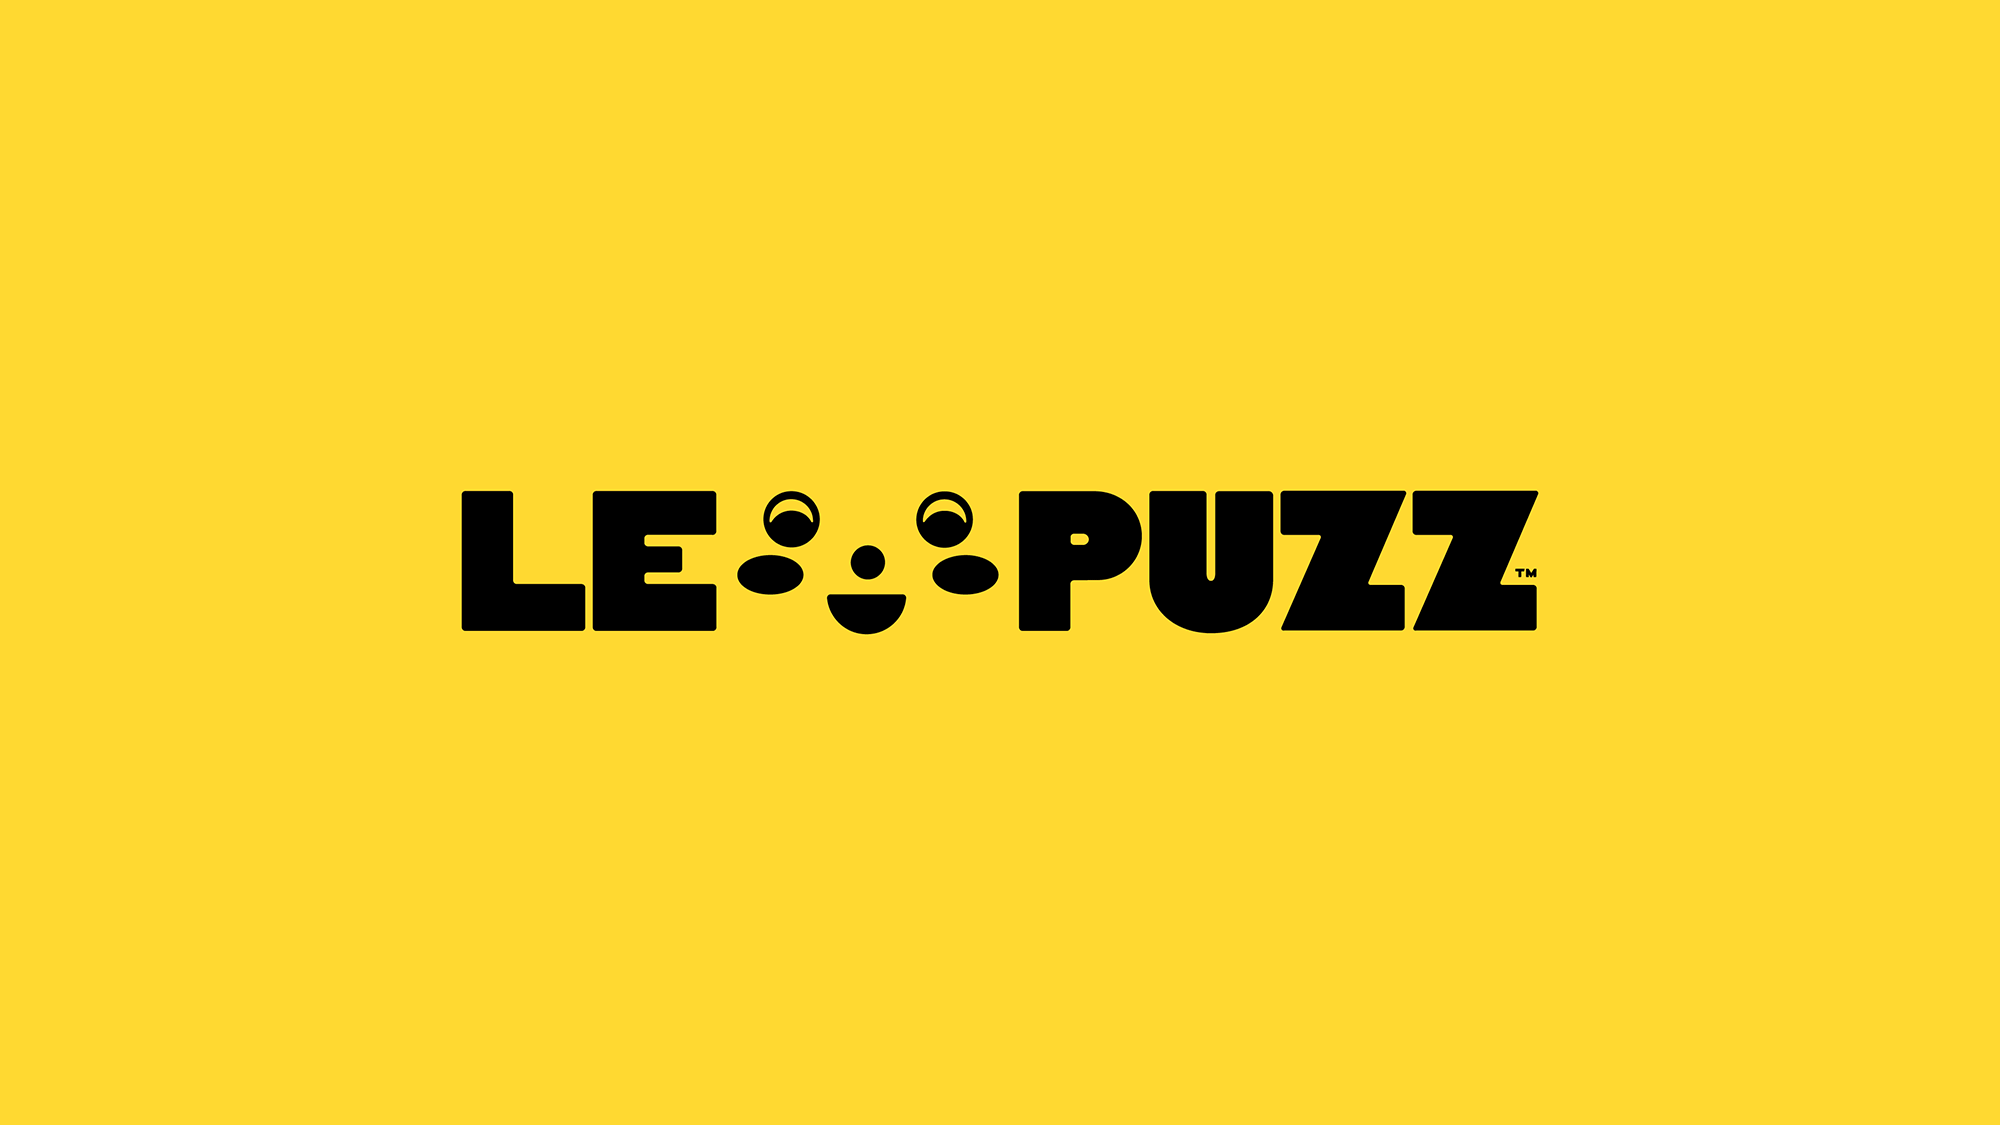 New Logo, Identity, and Packaging for Le Puzz by Little Troop